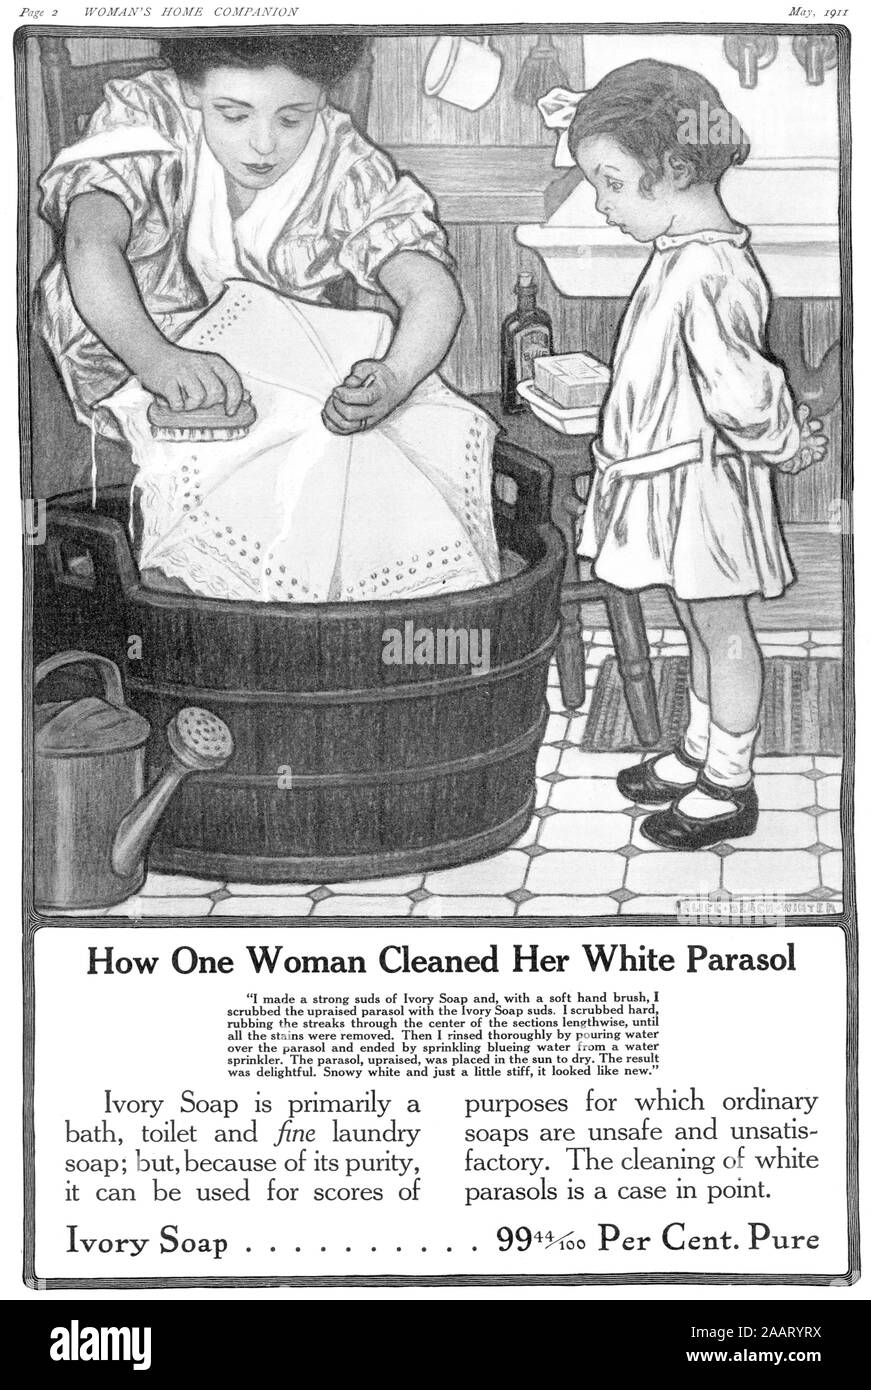 'How one woman cleaned her Parasol' - hi-res (A3+) retouched and revived detergent advertisement taken from 1911 magazine Stock Photo